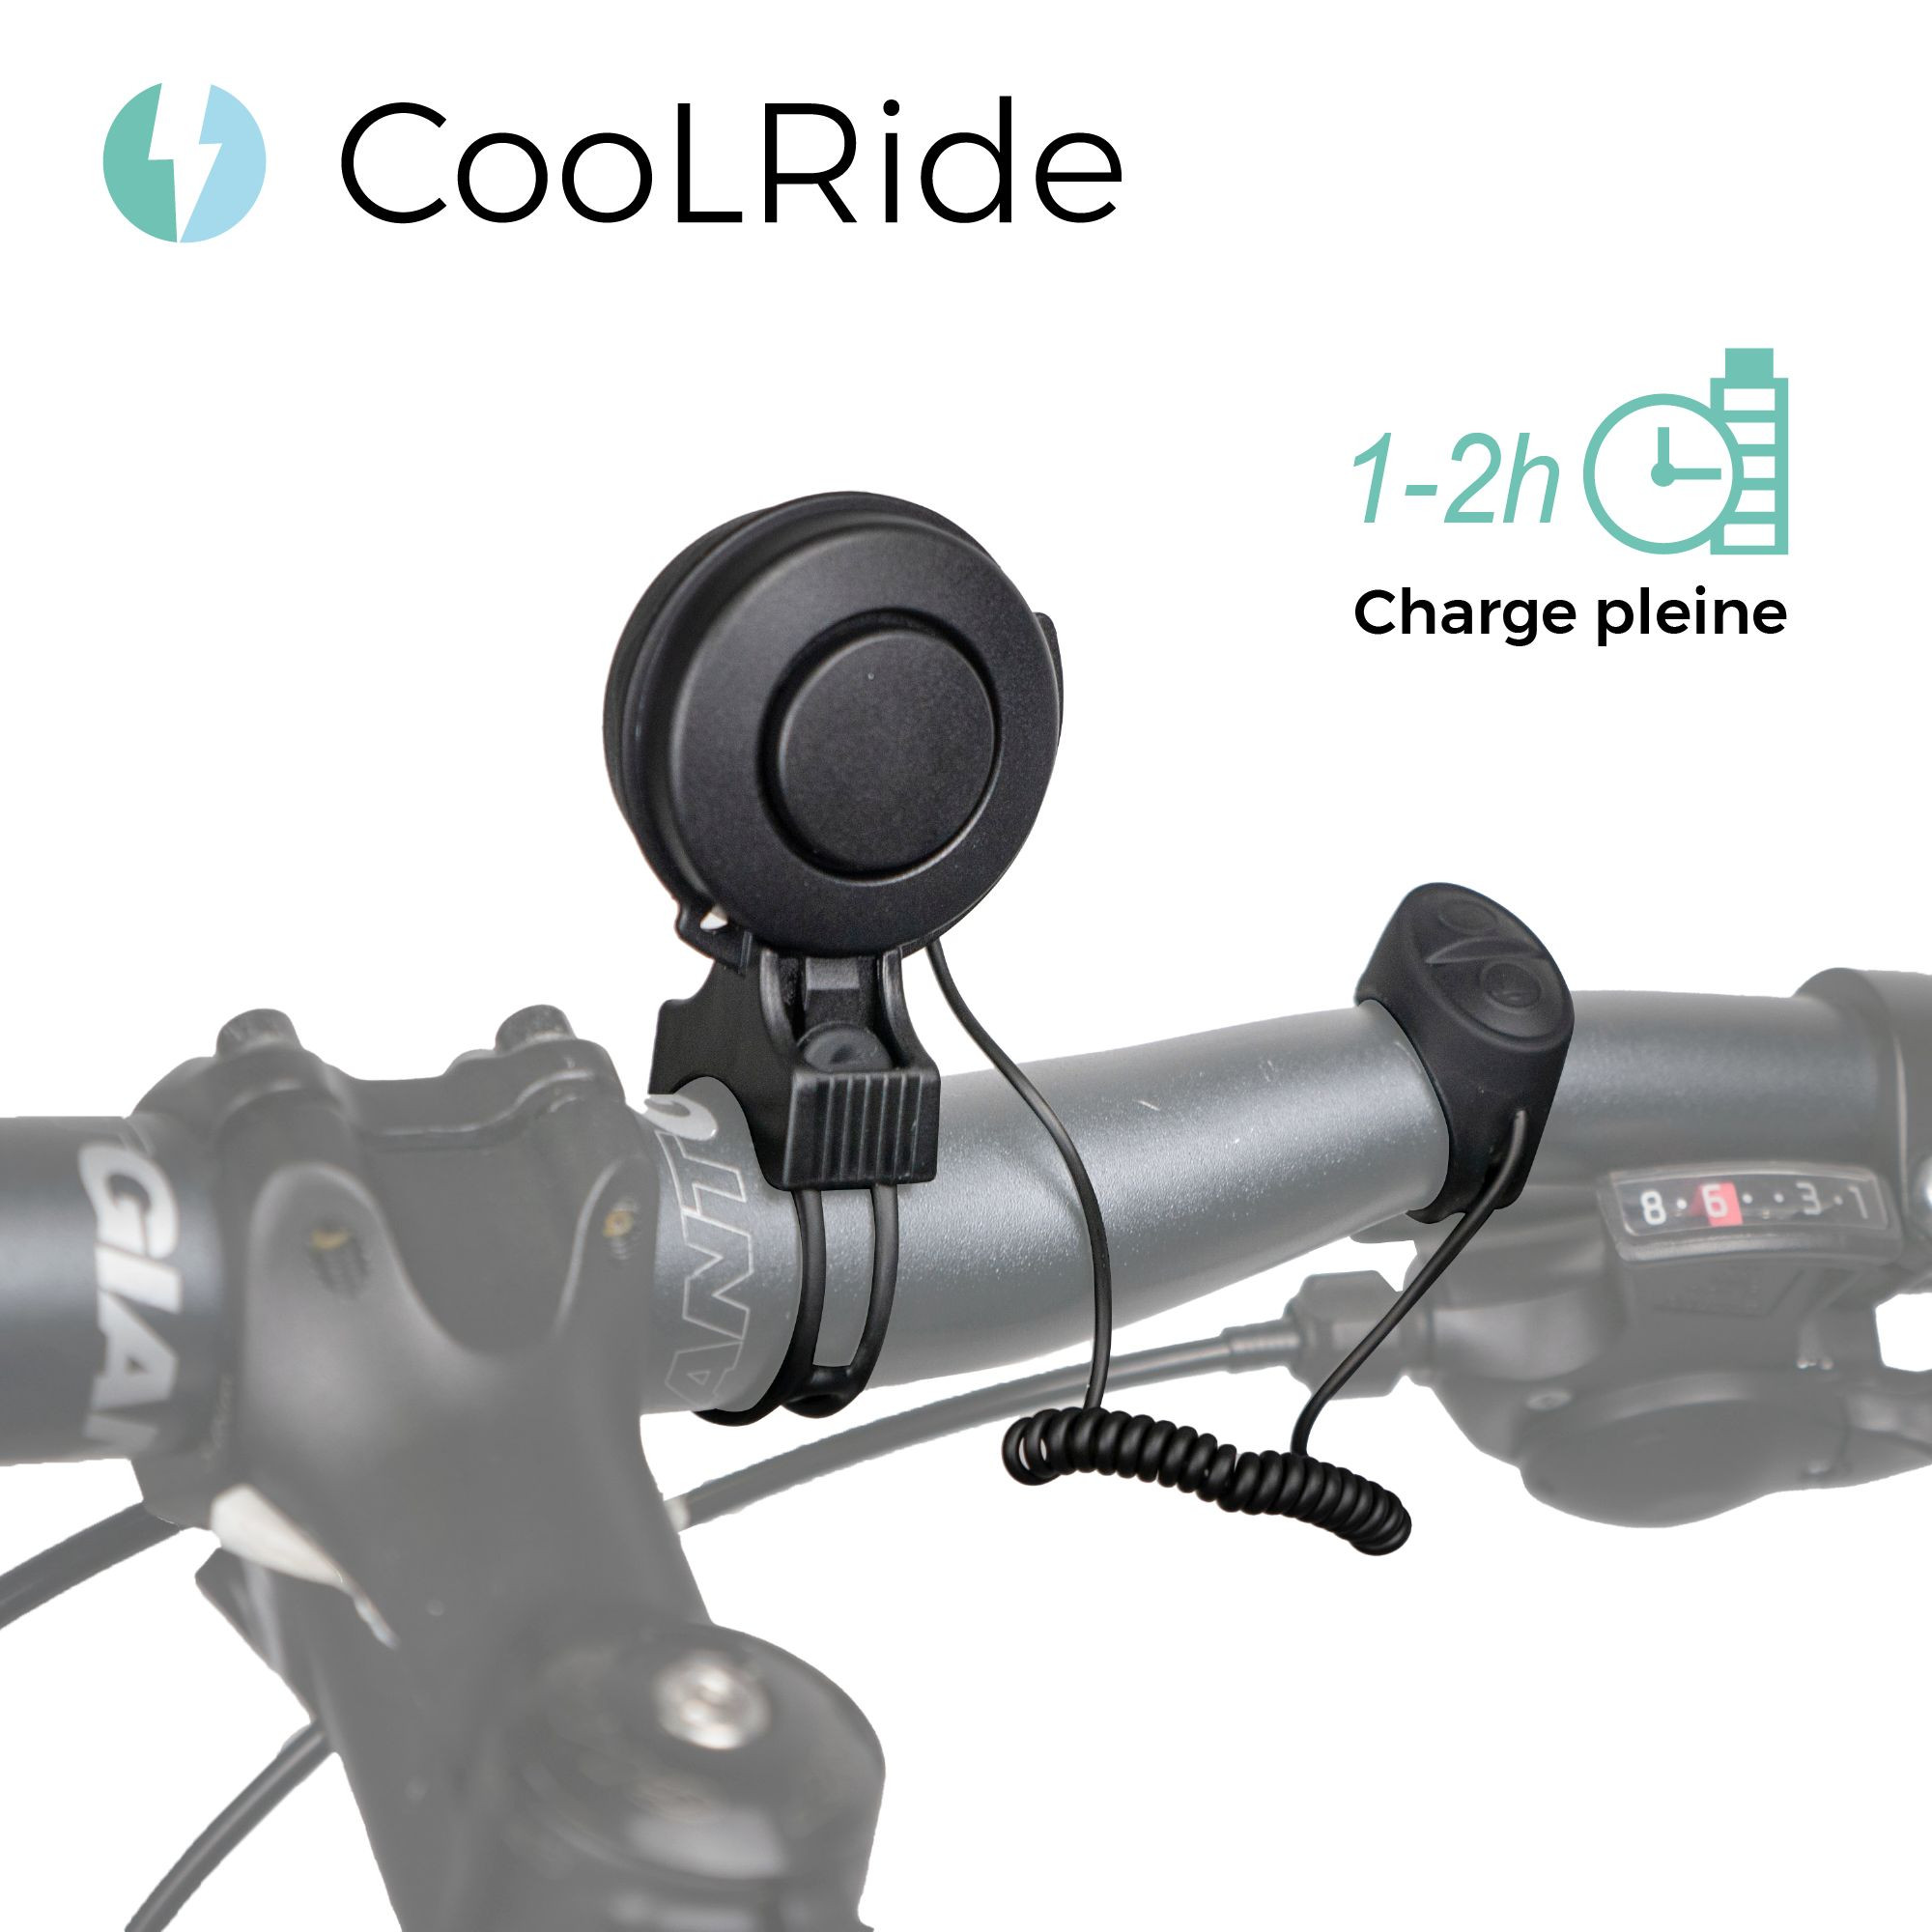 Cool ride SIRENE ELECTRONIQUE RECHARGEABLE USB